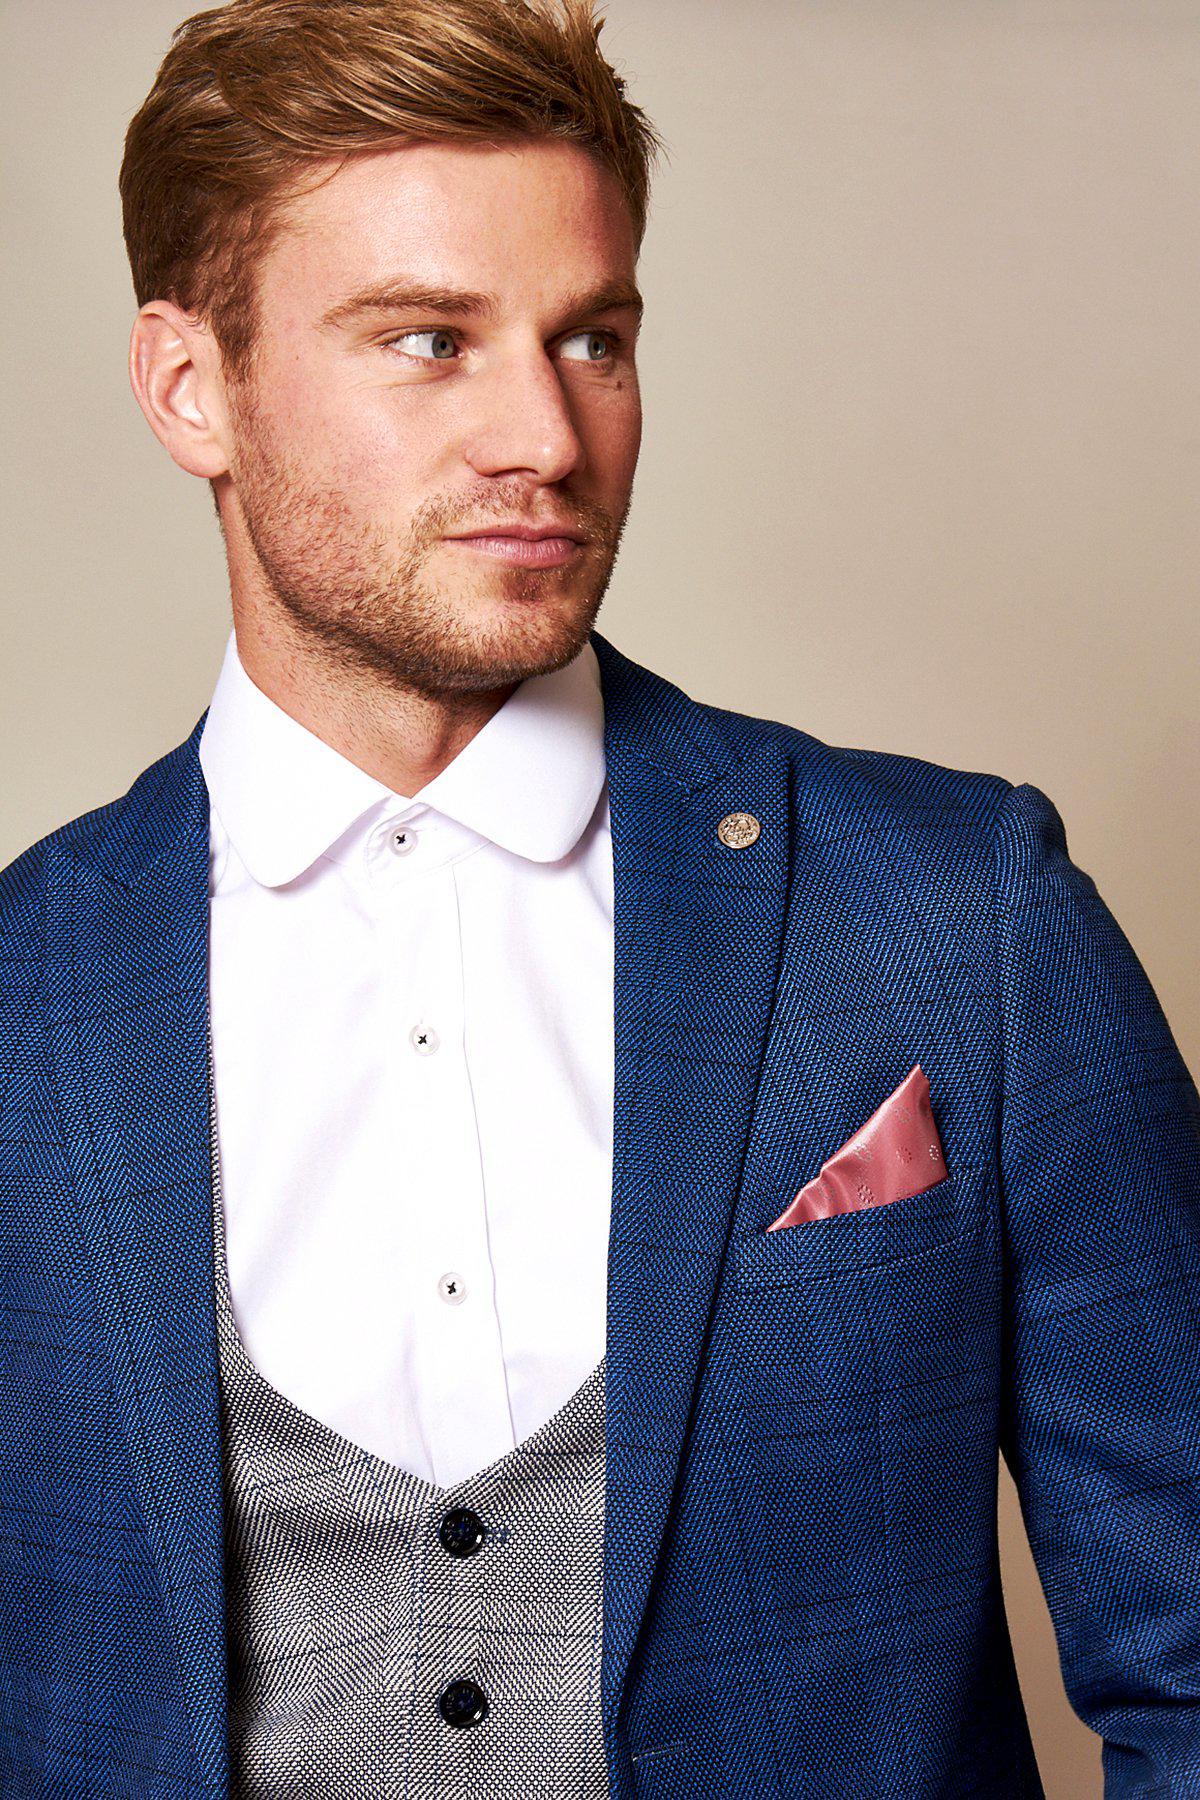 Blue Check Suit With Grey Waistcoat – Marc Darcy